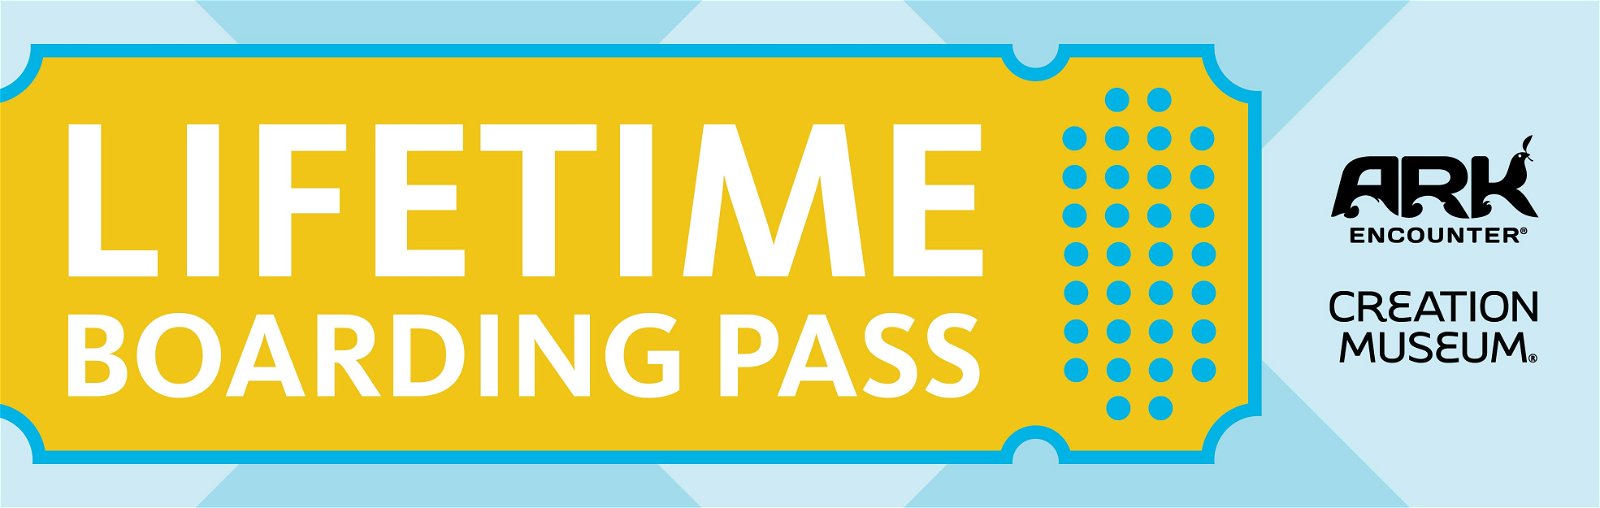 Get Them Before They’re Gone! Lifetime Boarding Passes Available Only Through December 31